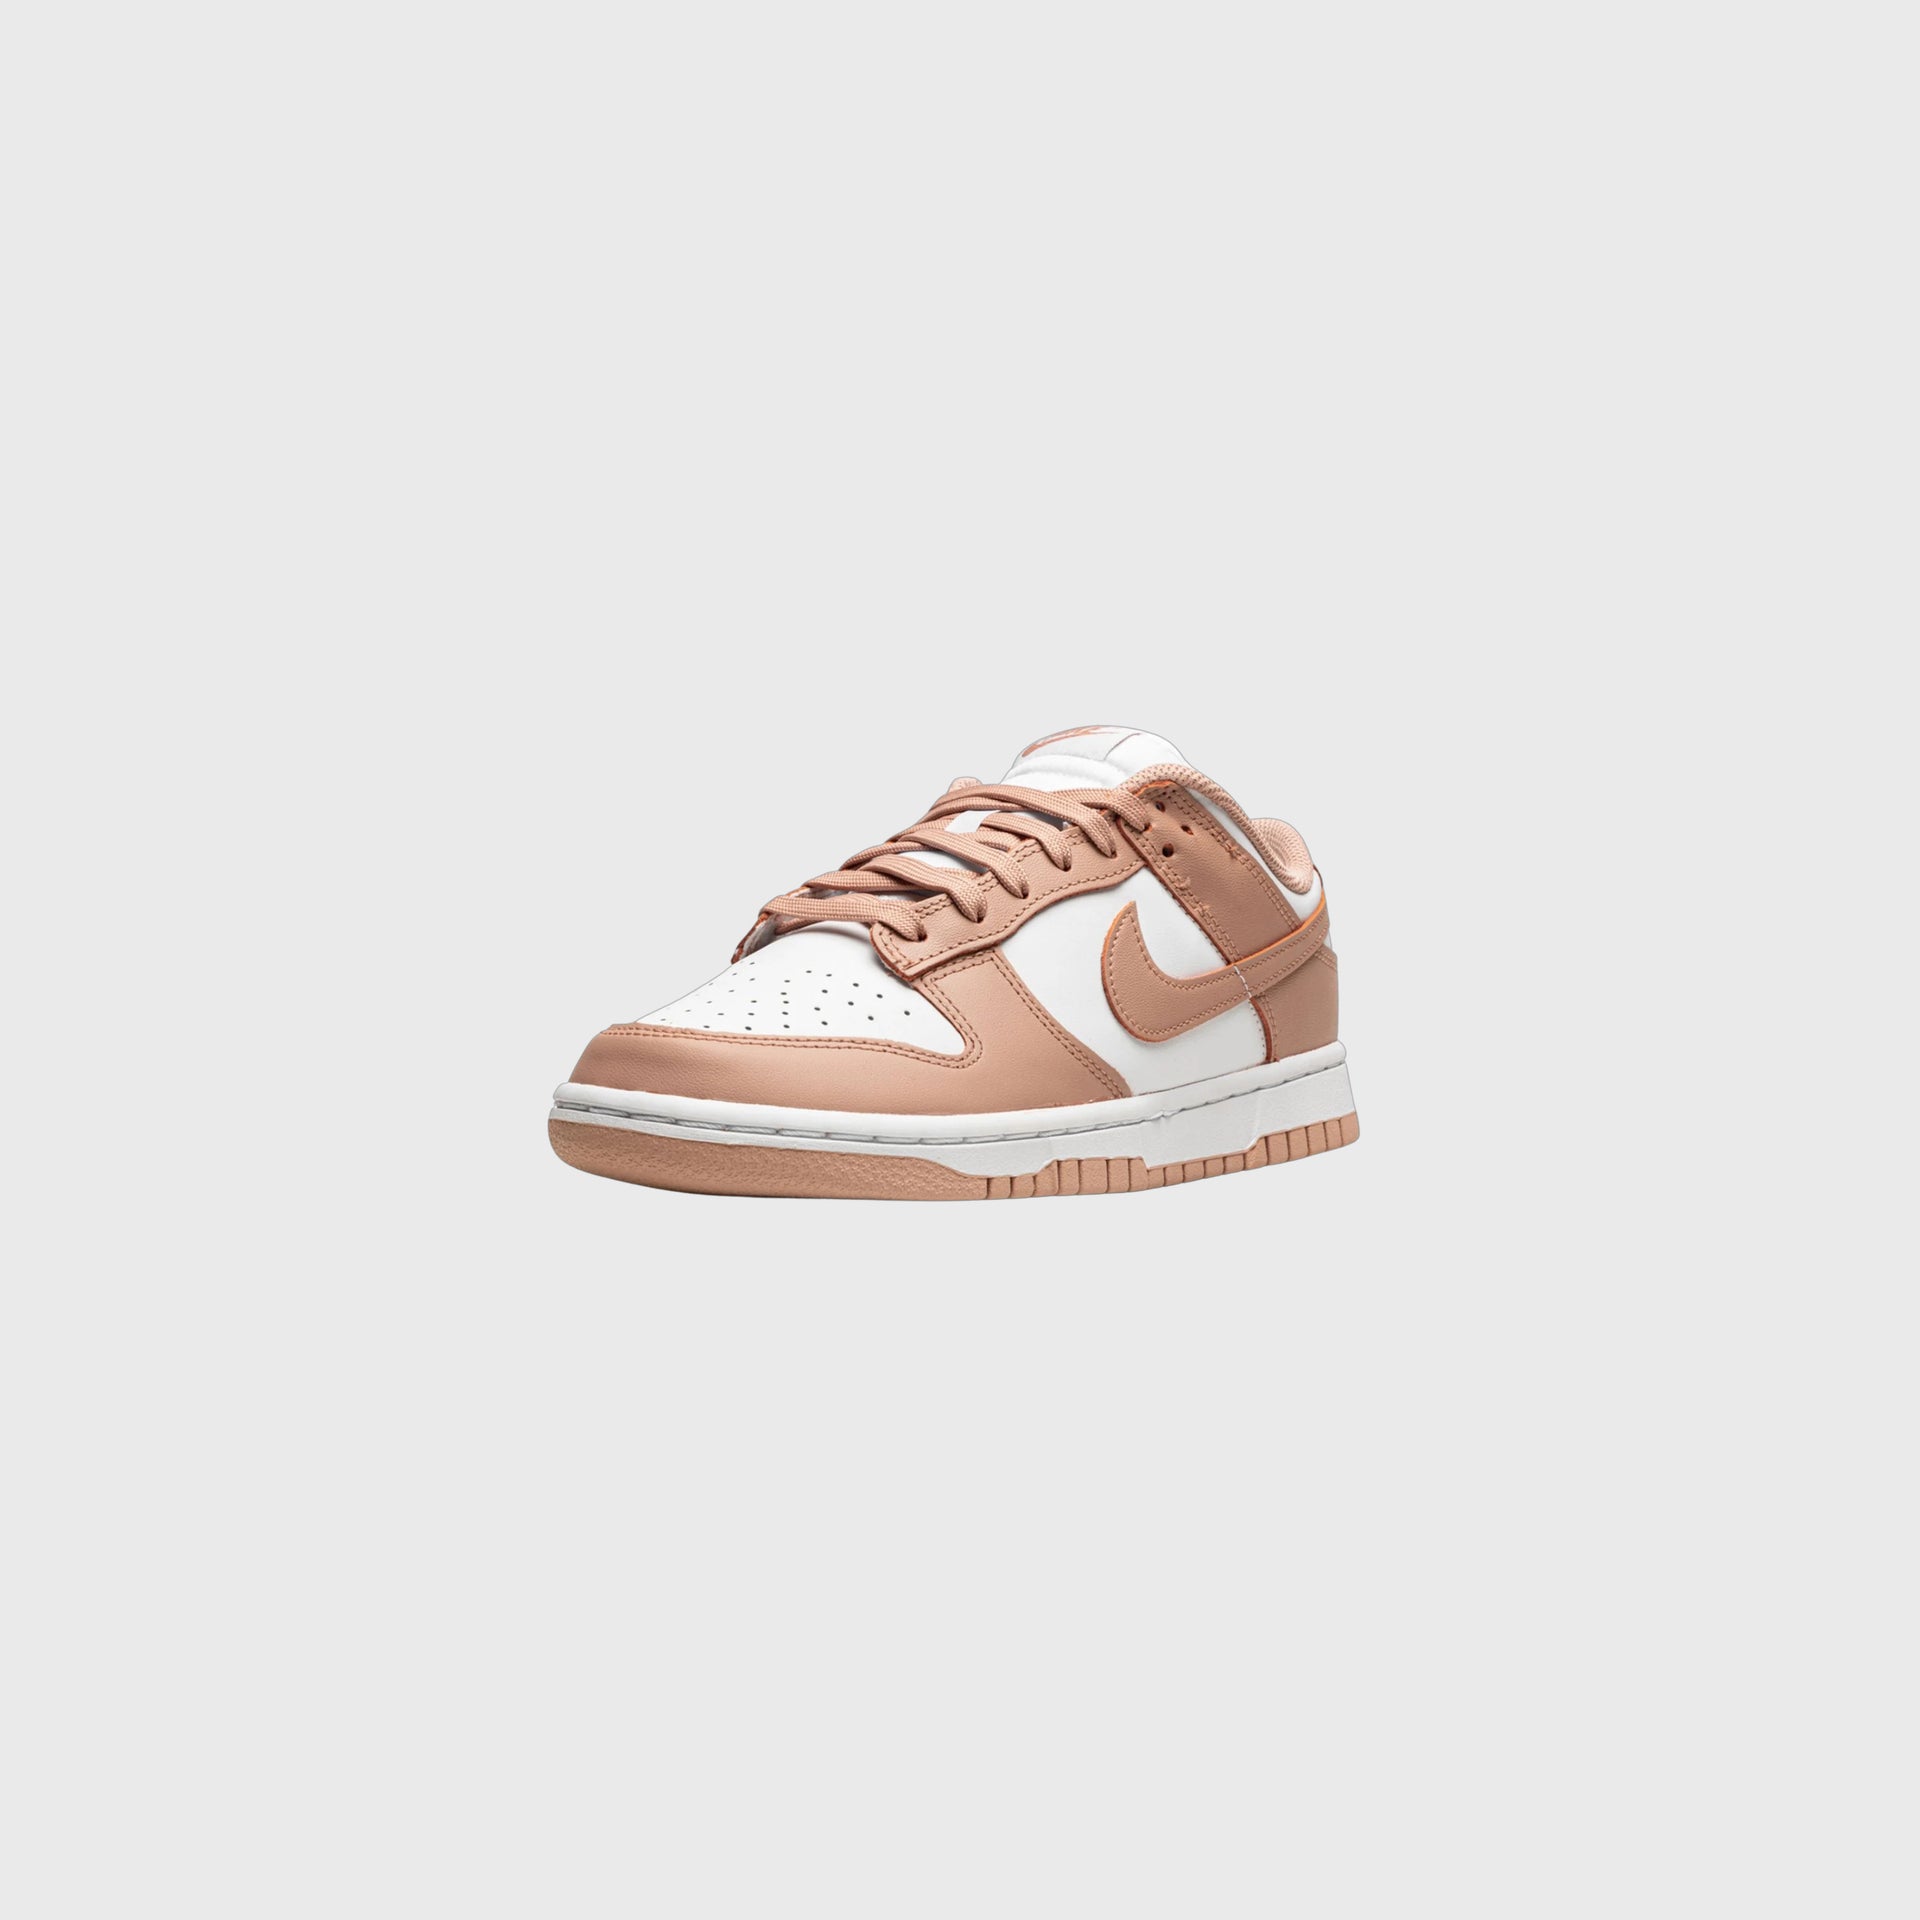 DUNK LOW WMNS "Rose Whisper"